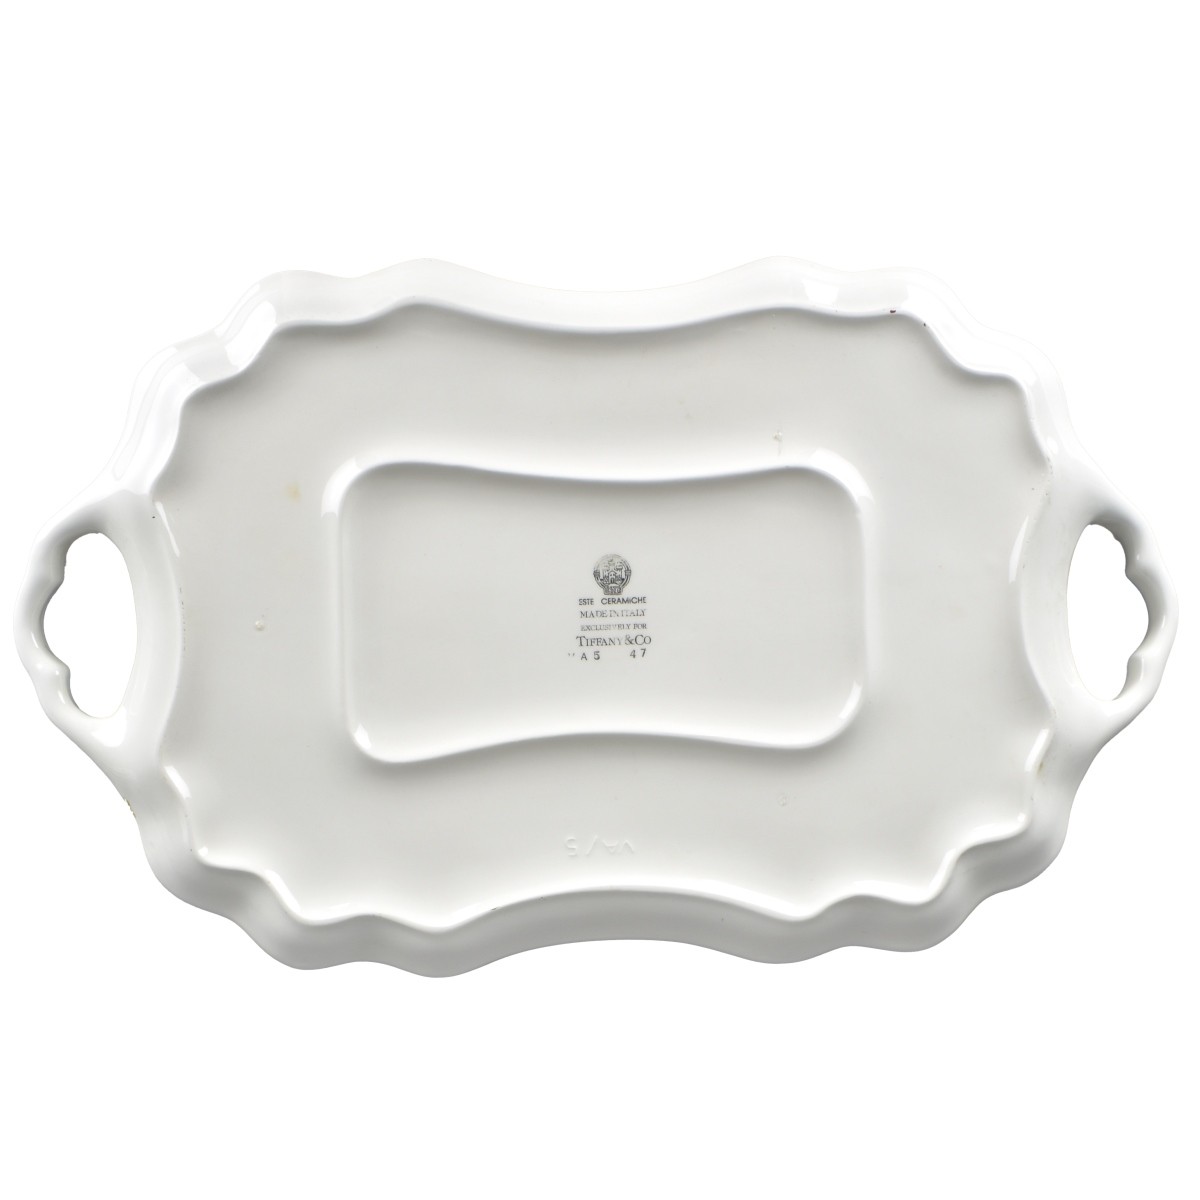 Tiffany & Co. Porcelain Tray and Cachepot